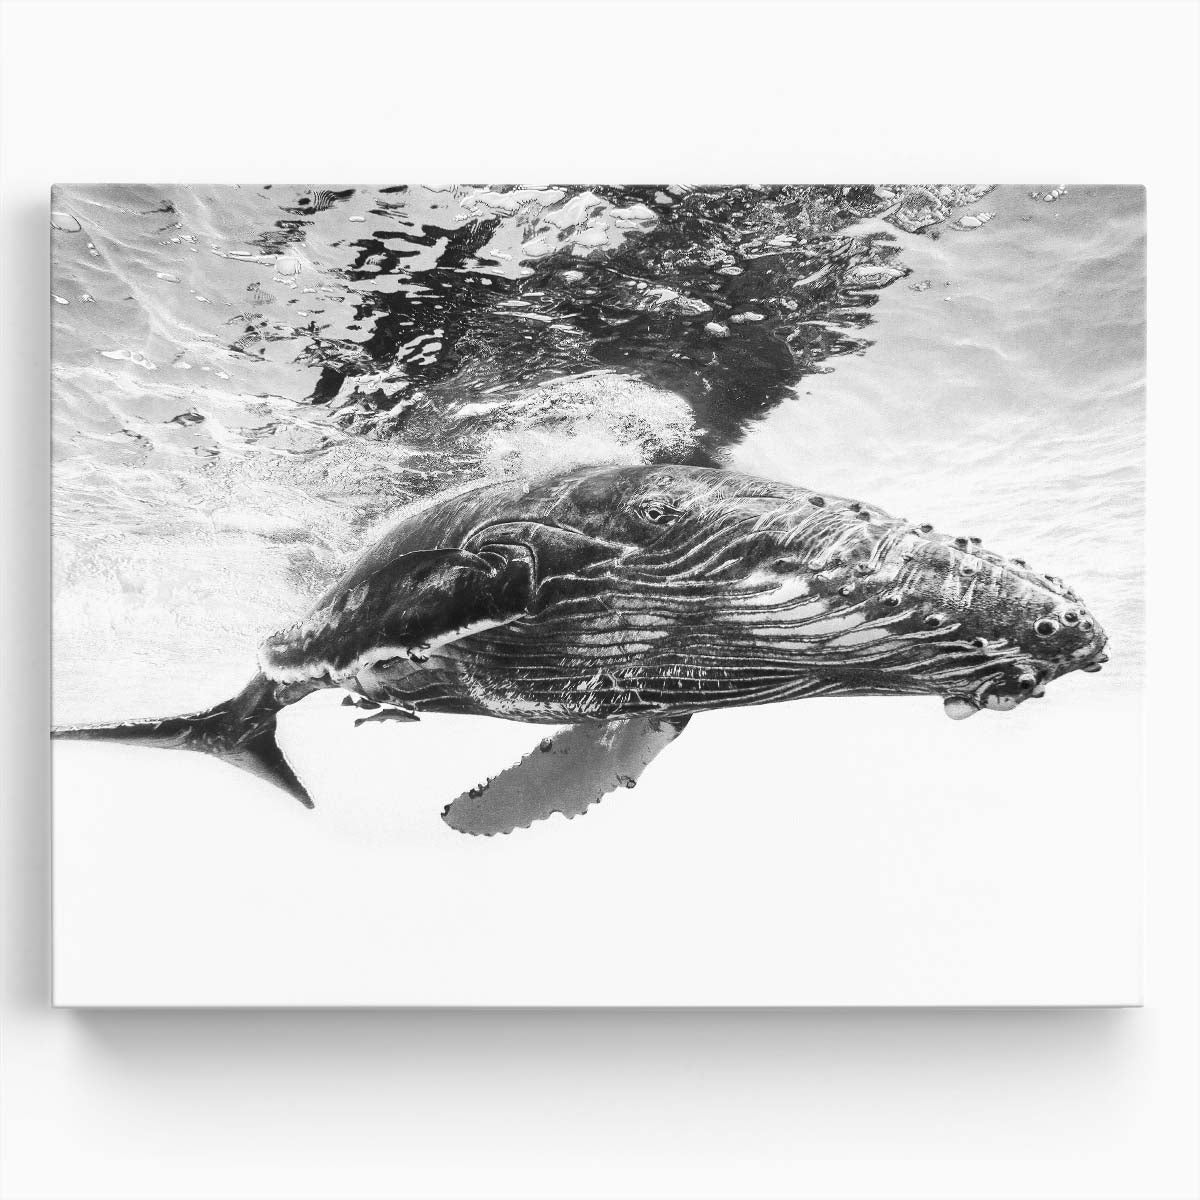 Humpback Whale Calf Ocean Wildlife Photography Wall Art by Luxuriance Designs. Made in USA.